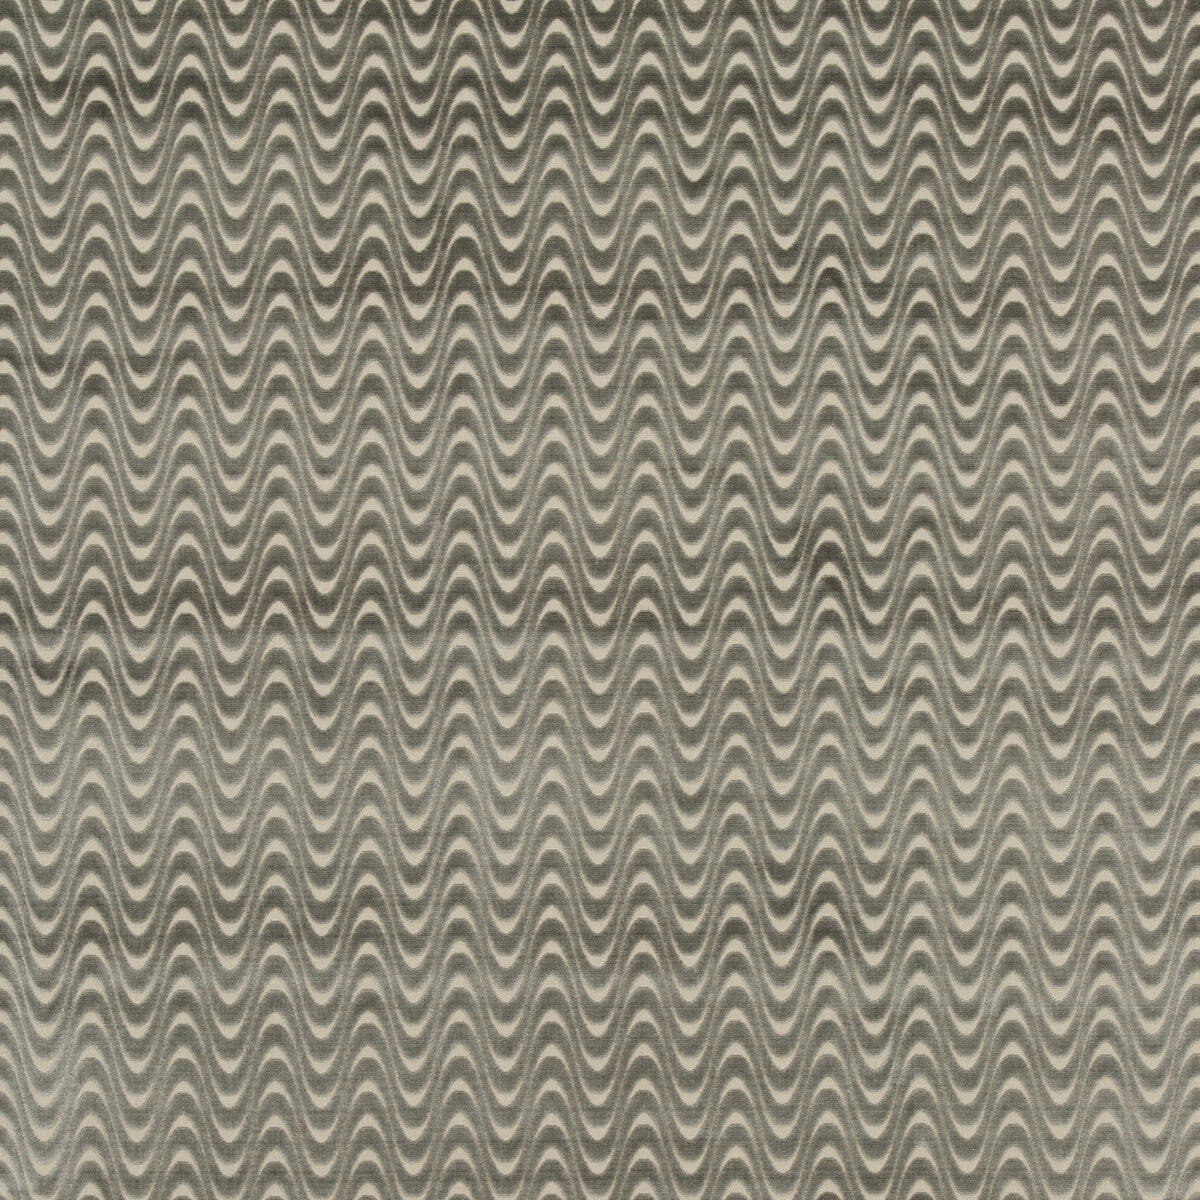 Jive fabric in silver color - pattern PF50421.925.0 - by Baker Lifestyle in the Carnival collection